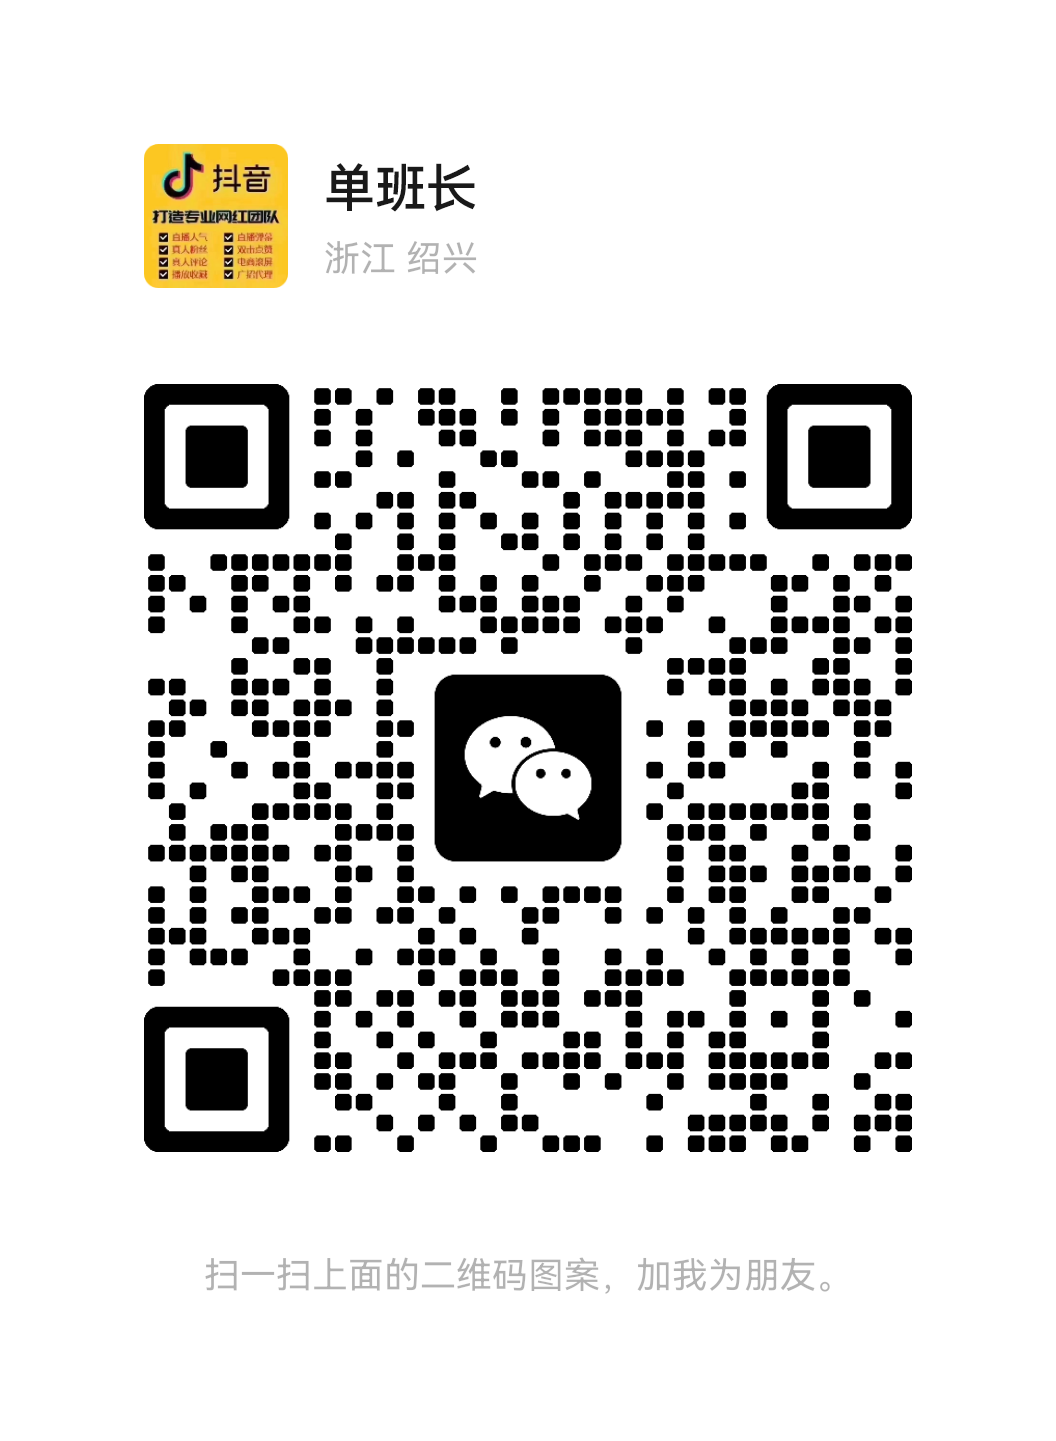 mmqrcode1676436227313.png